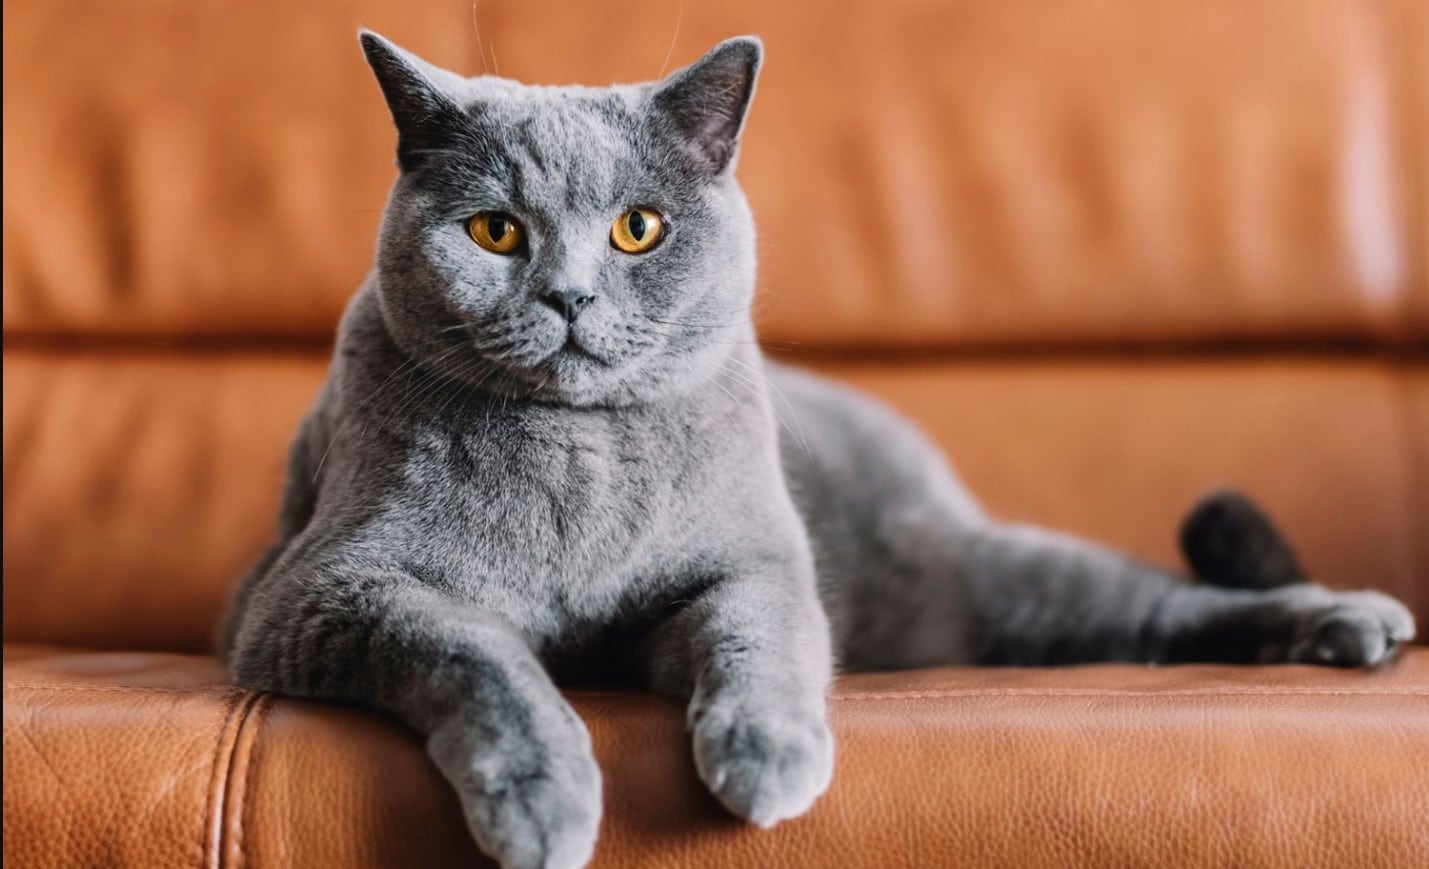 The Chartreux is a cat breed known for its big, beautiful eyes